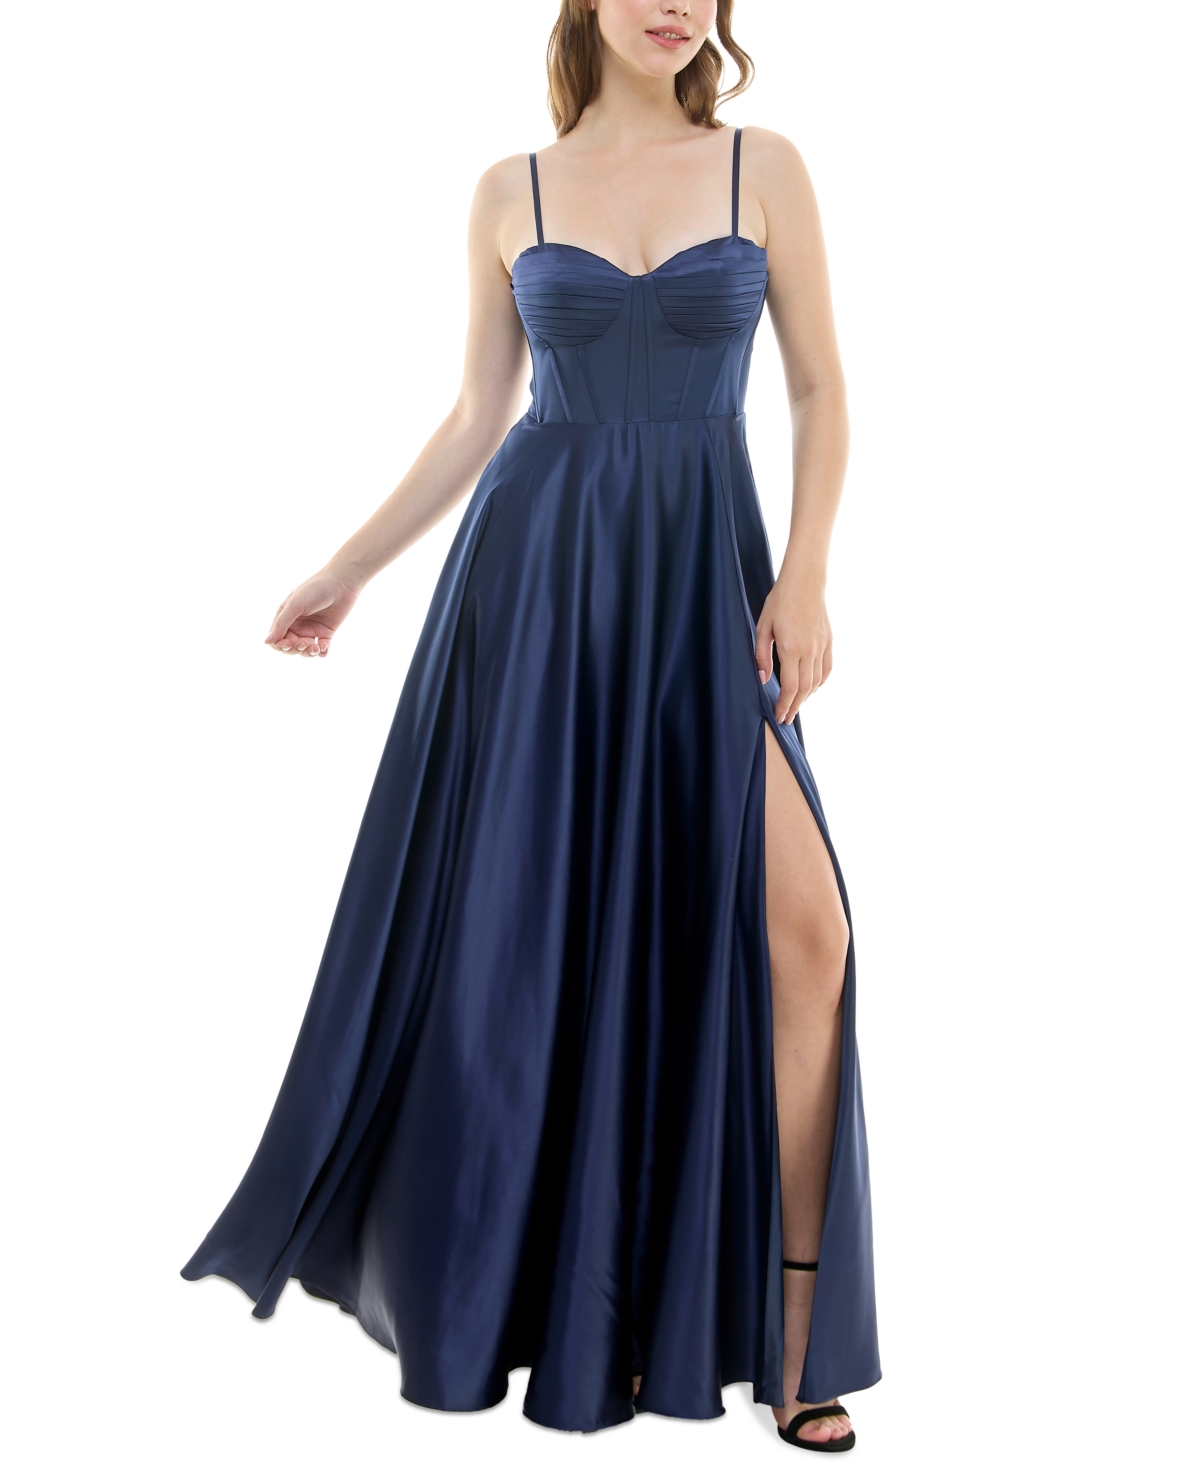 Juniors' Pleated-Bodice High-Slit Evening Gown - Navy